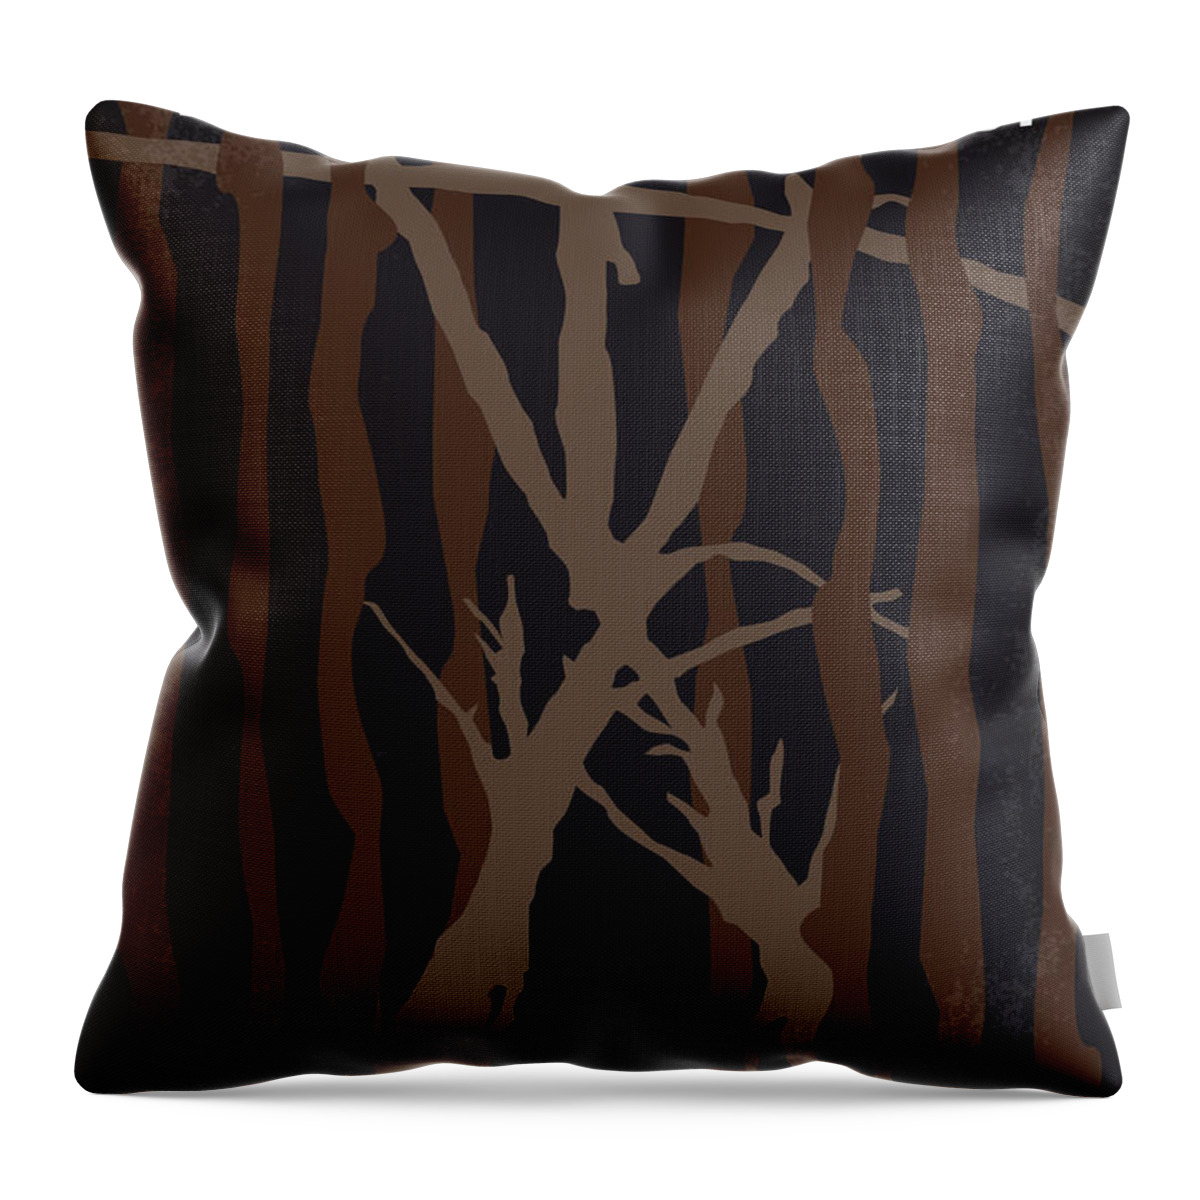 The Blair Witch Project Throw Pillow featuring the digital art No476 My The Blair Witch Project minimal movie poster by Chungkong Art